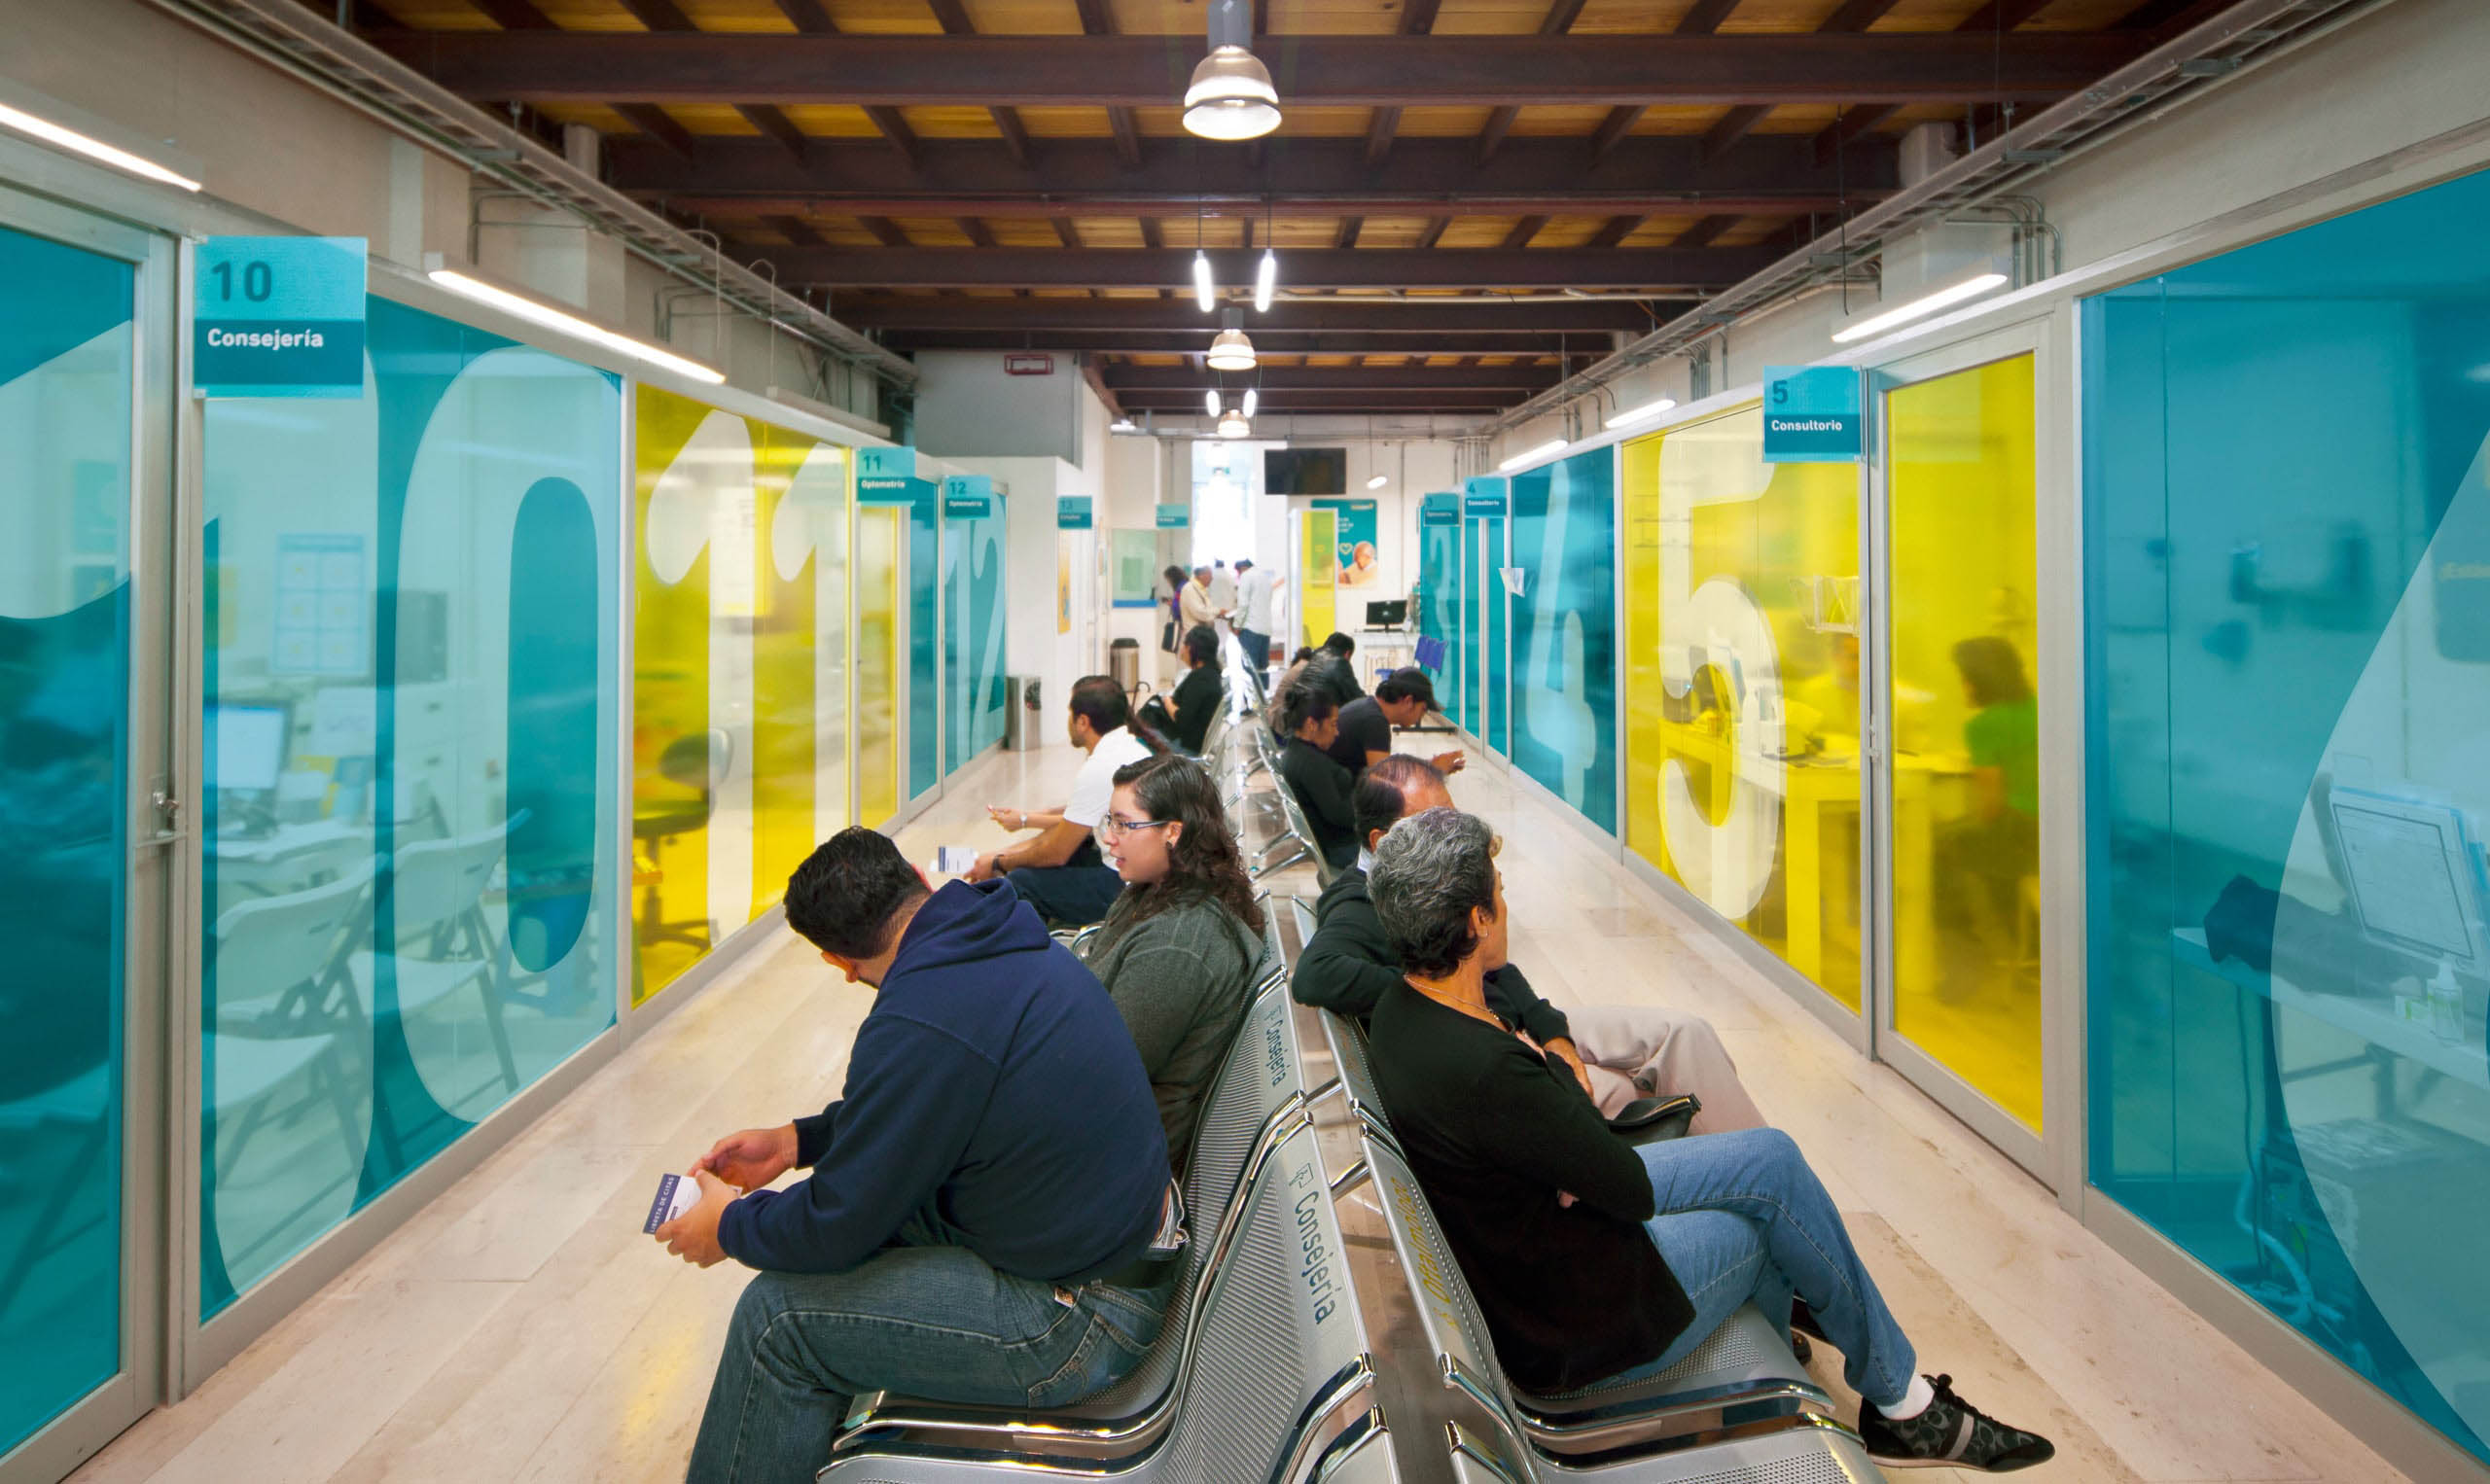 A group of people sitting in a hallway with colorful walls, redefining the experience.